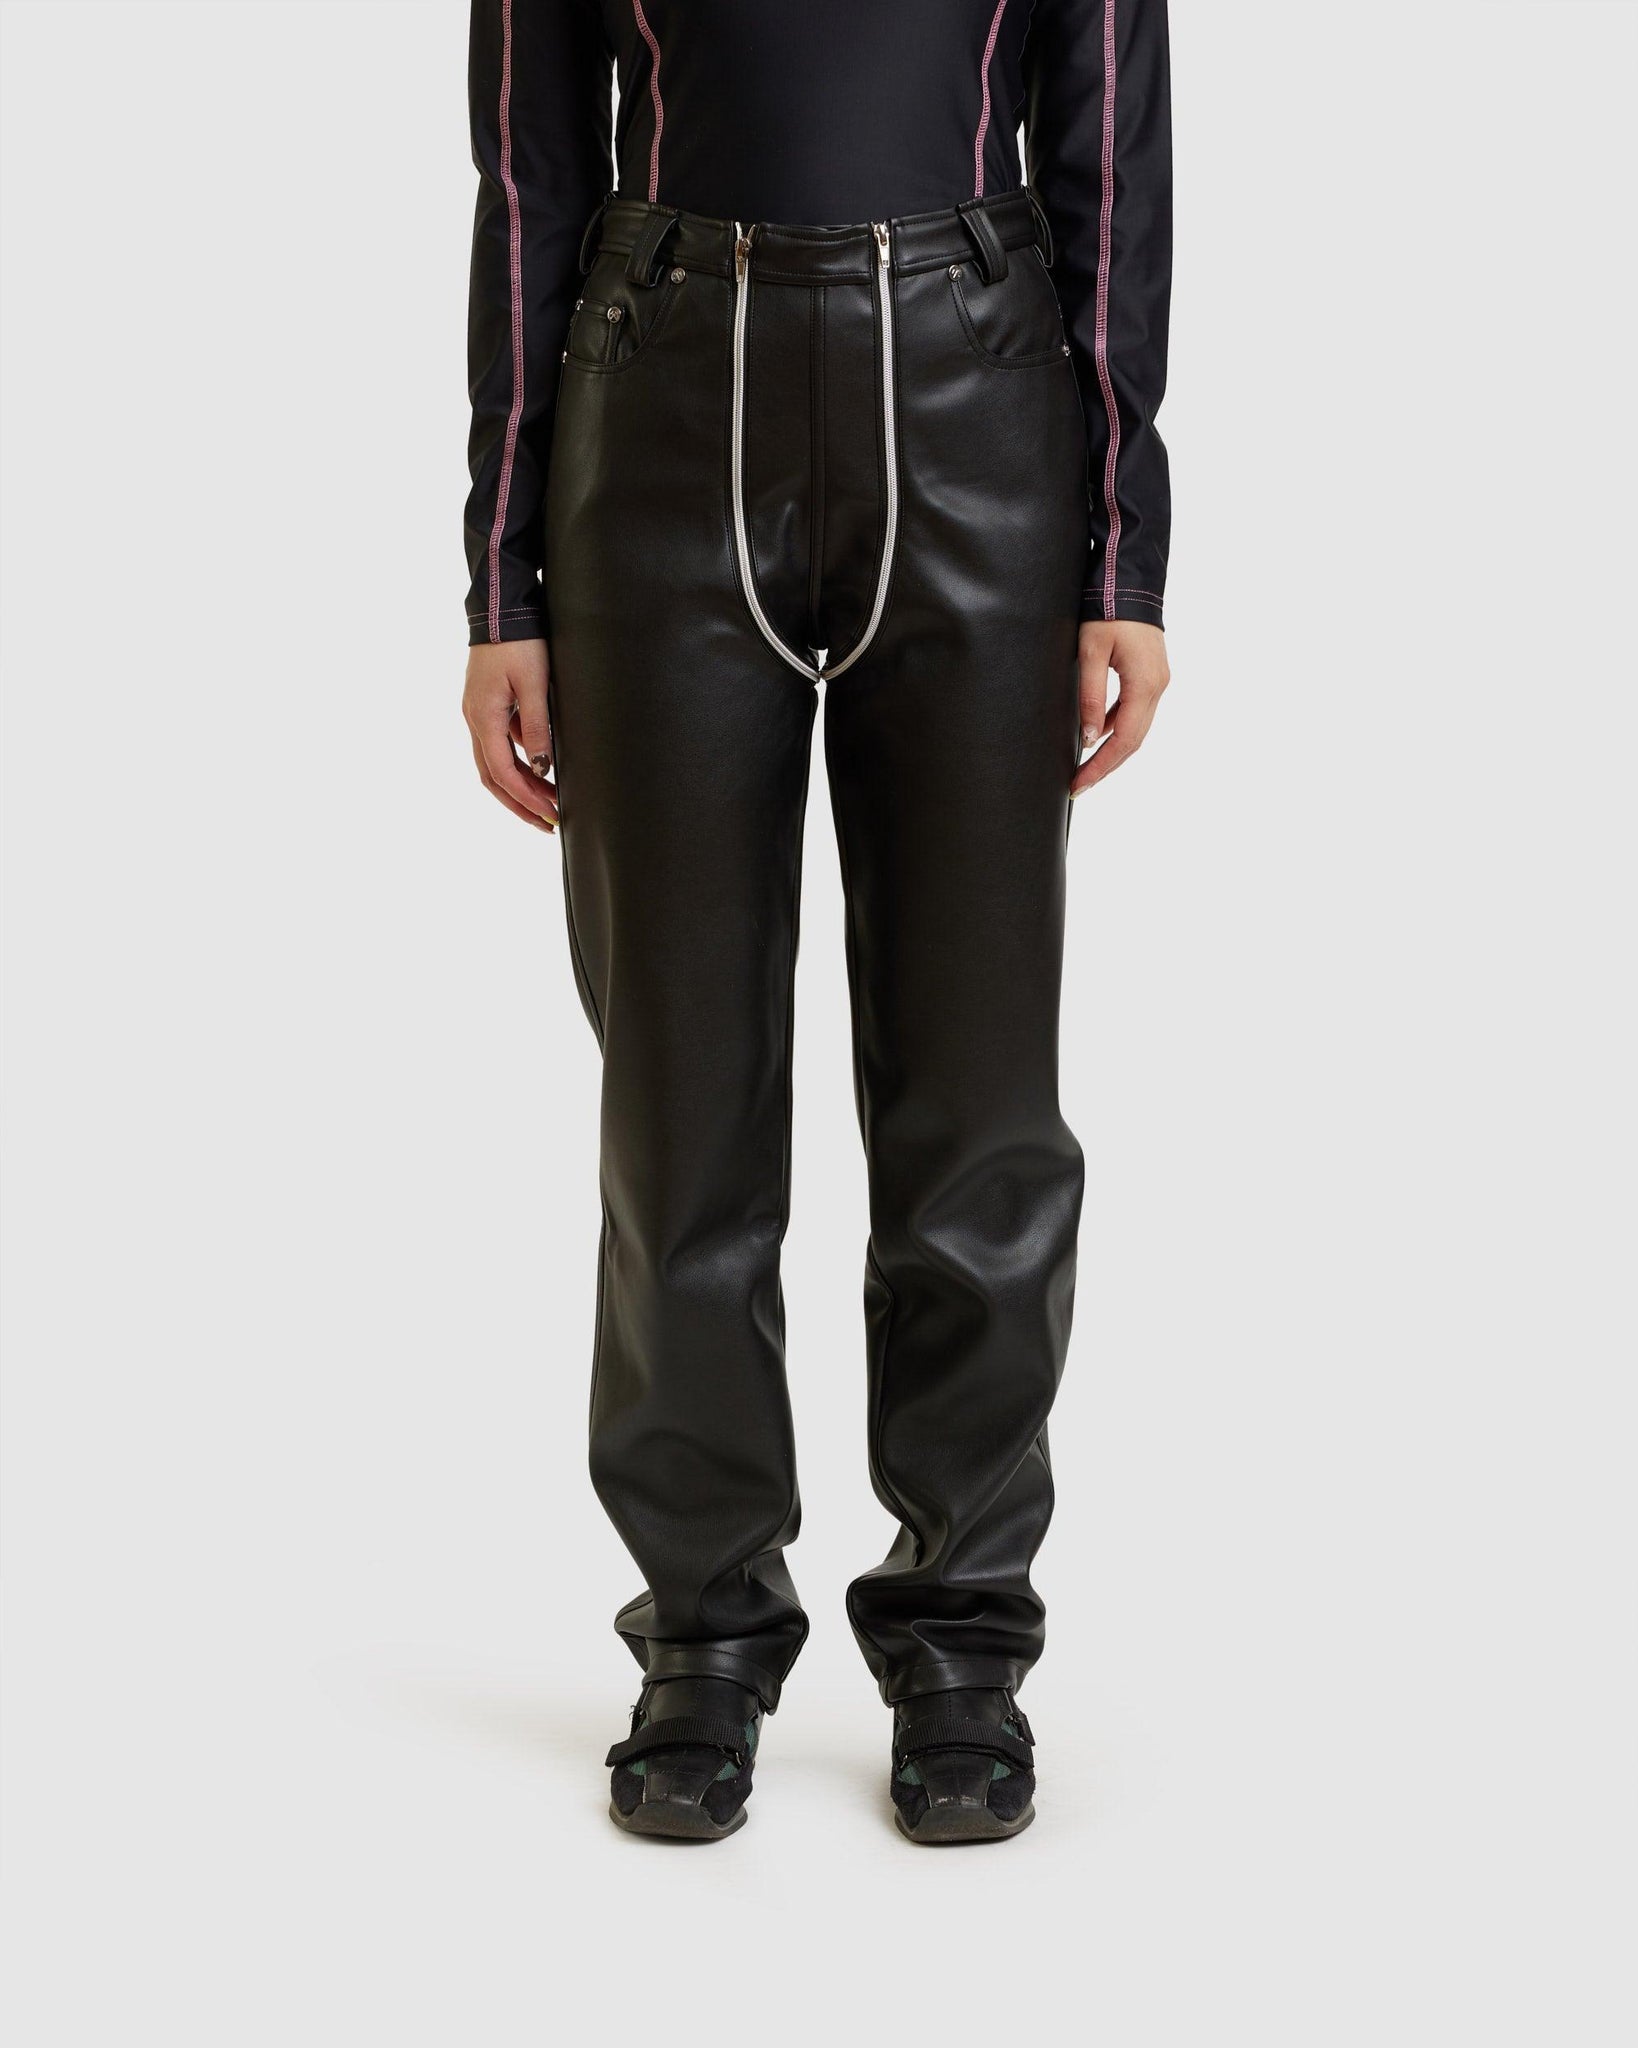 Lata Pleather Trousers - {{ collection.title }} - Chinatown Country Club 